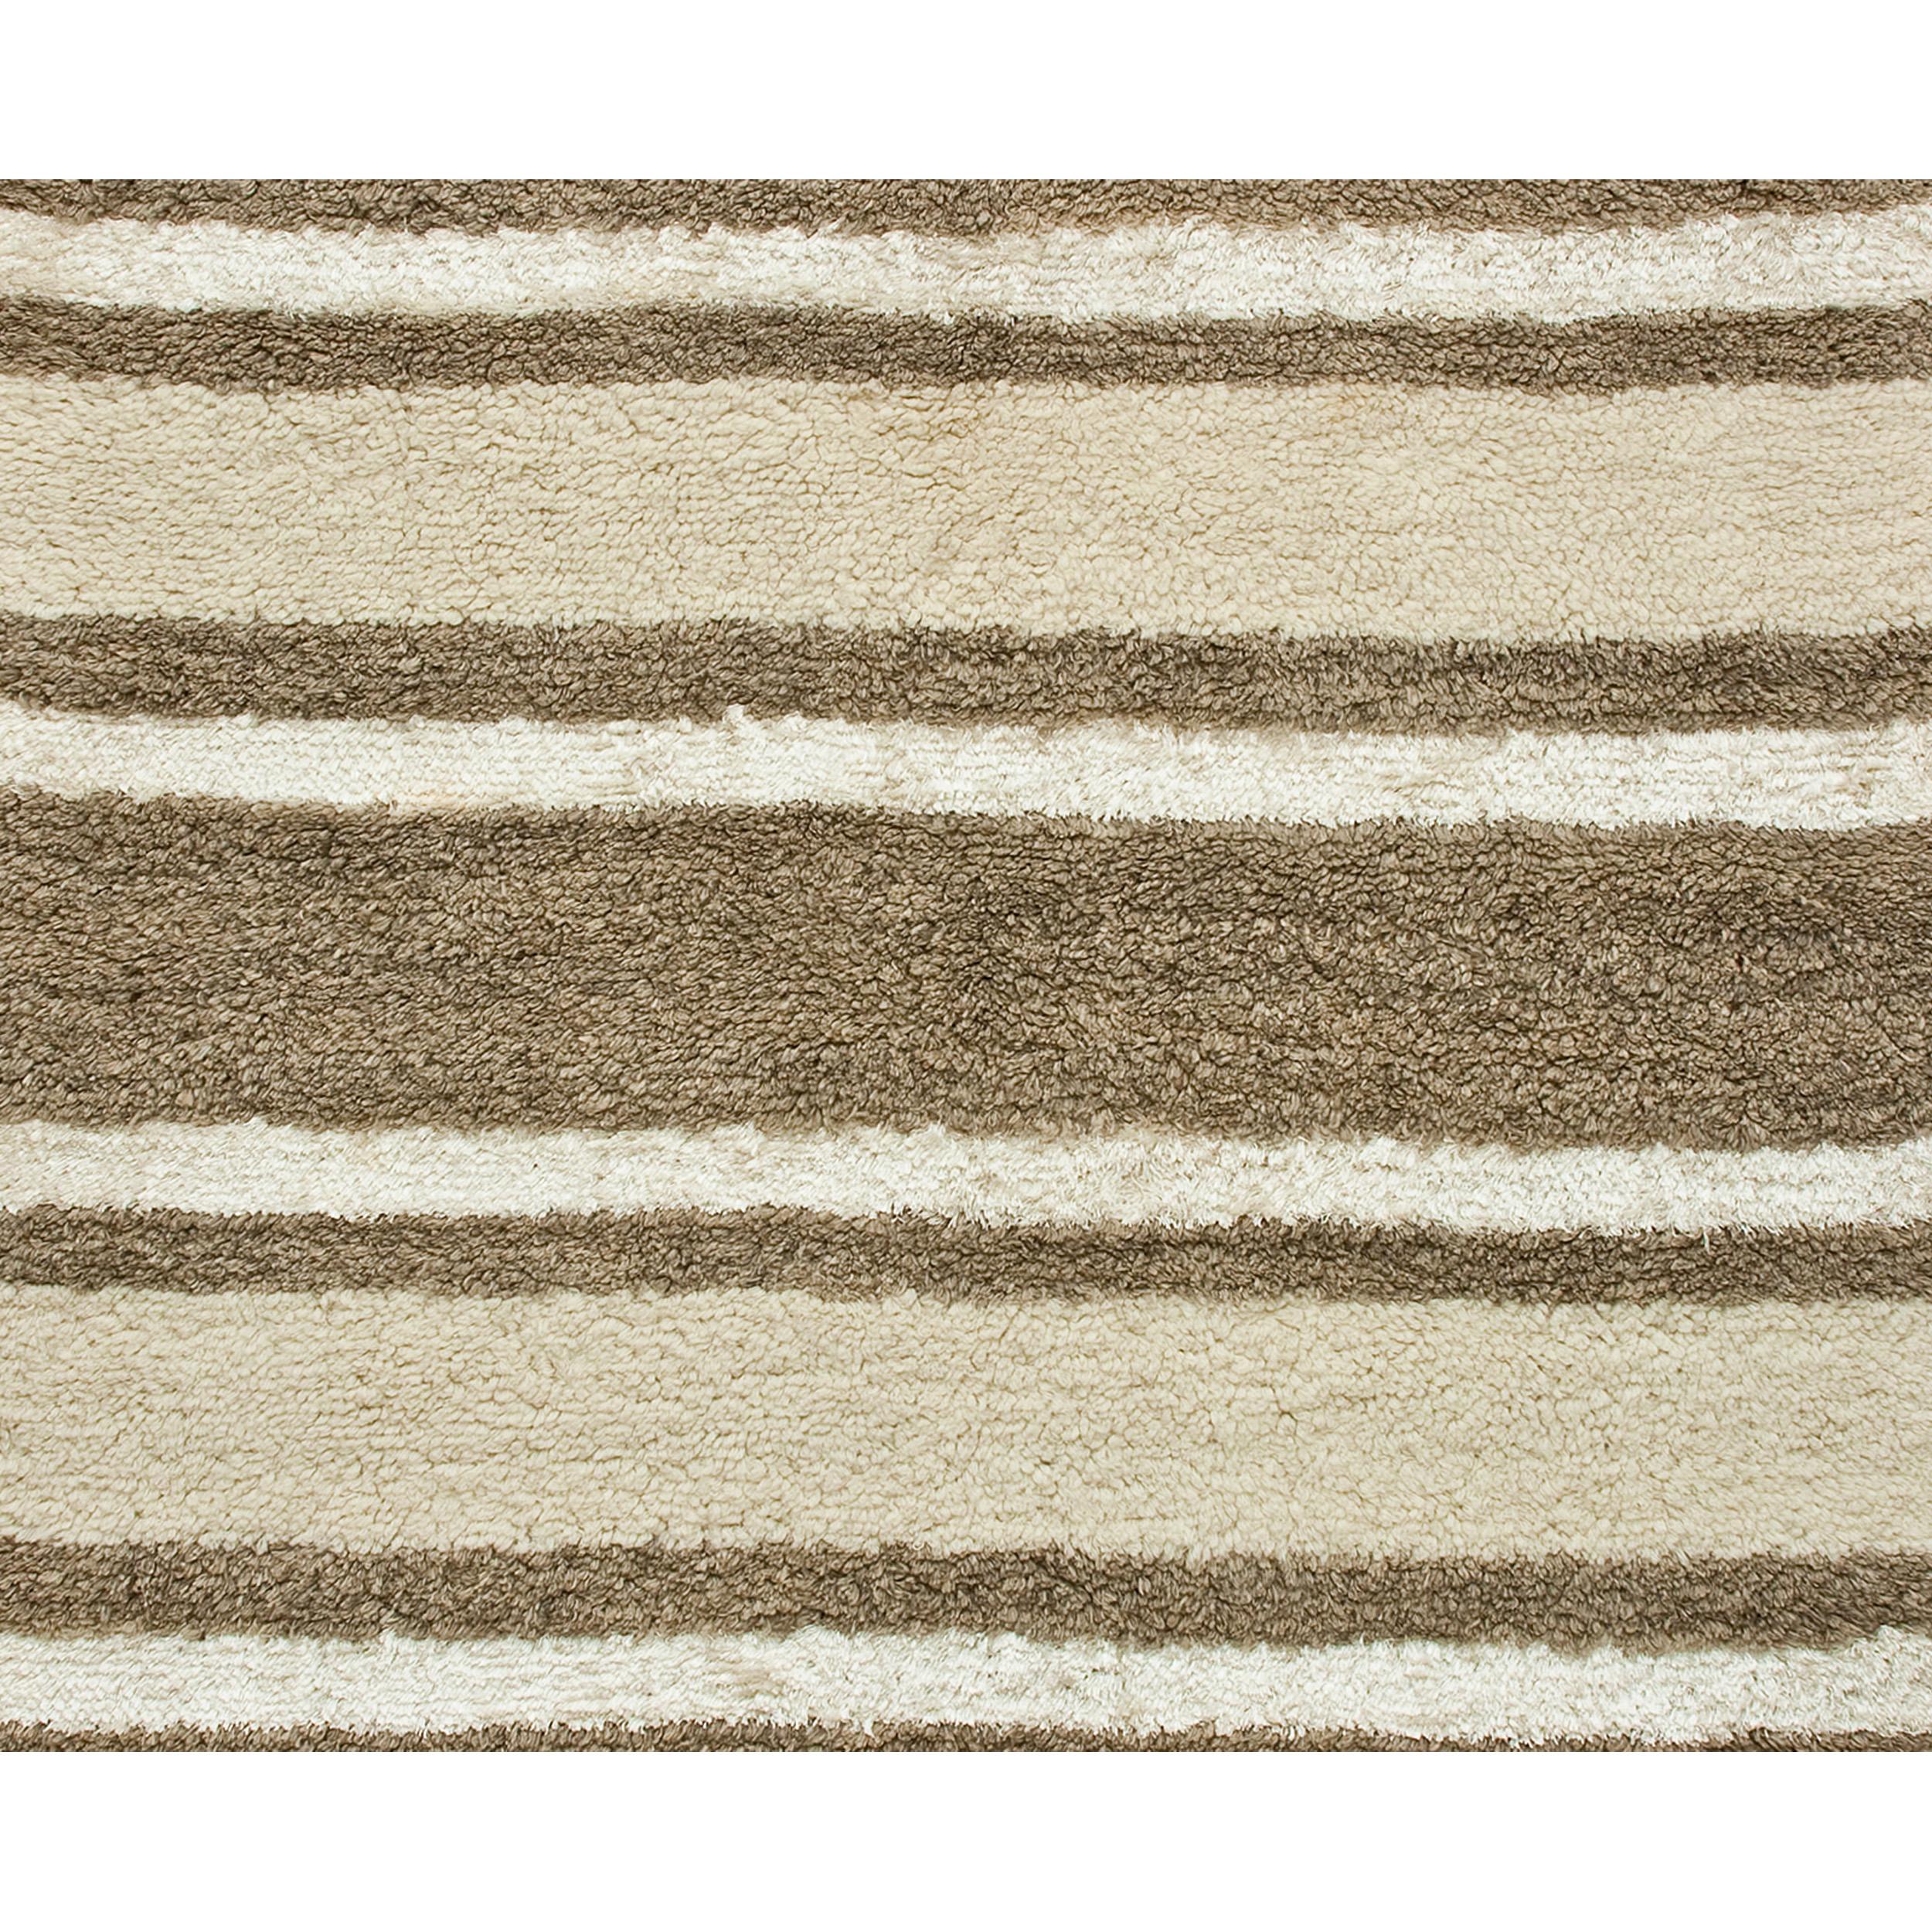 This luxurious modern rug was meticulously handwoven by skilled artisans in Nepal. This rug transcends its utilitarian purpose, becoming a work of art that delights the senses and seamlessly harmonizes with a variety of home decor styles. Every